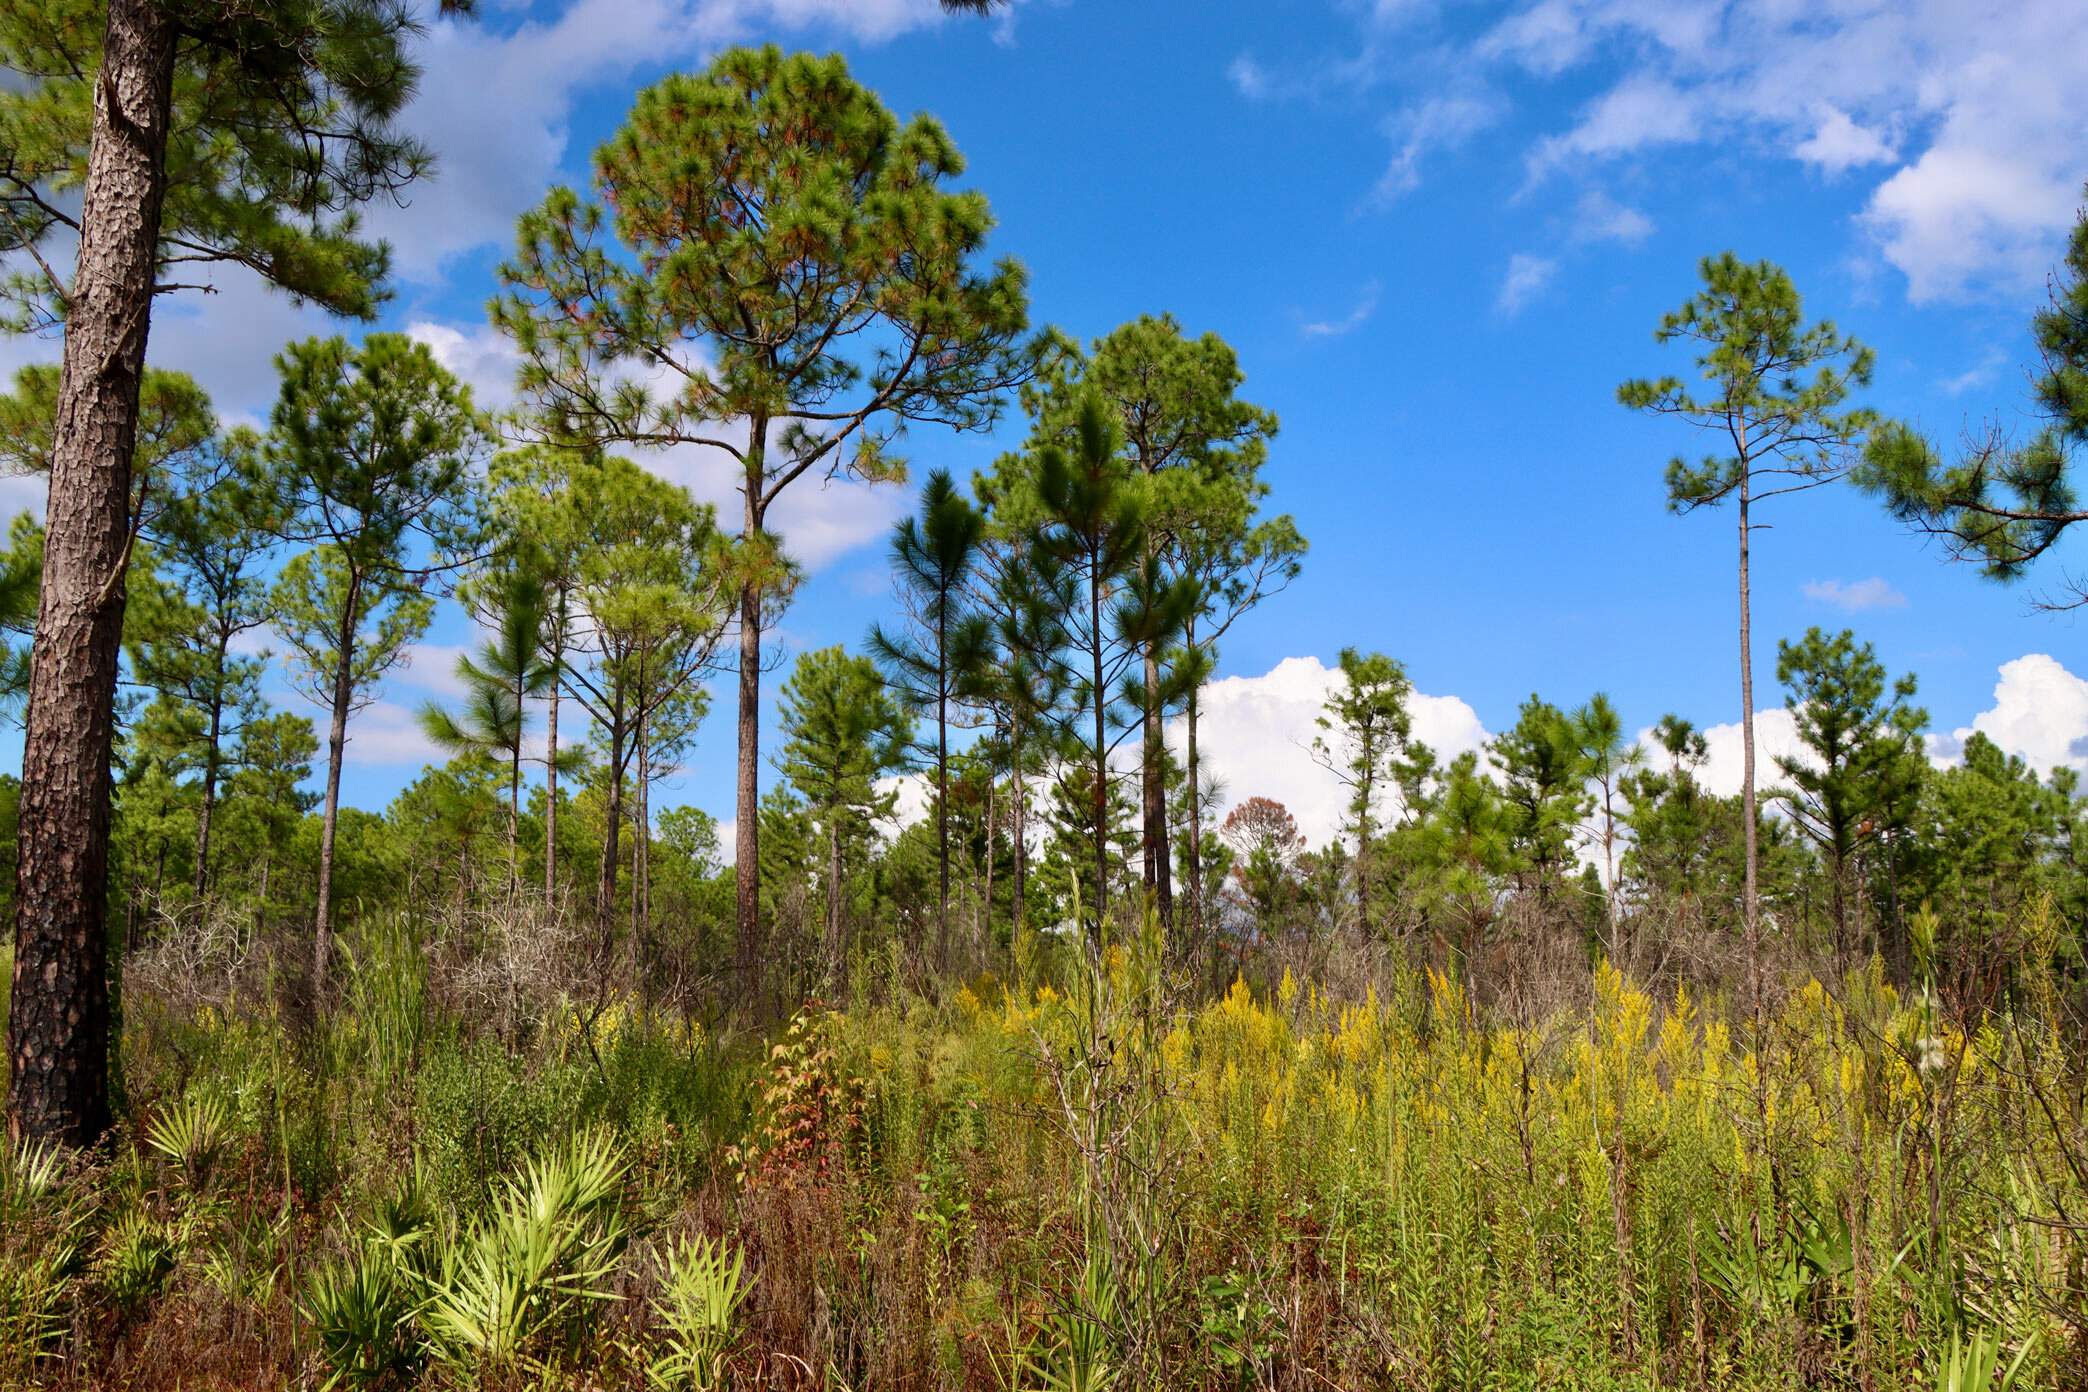  Flatwoods habitat with longleaf pine and a saw palmetto understory 